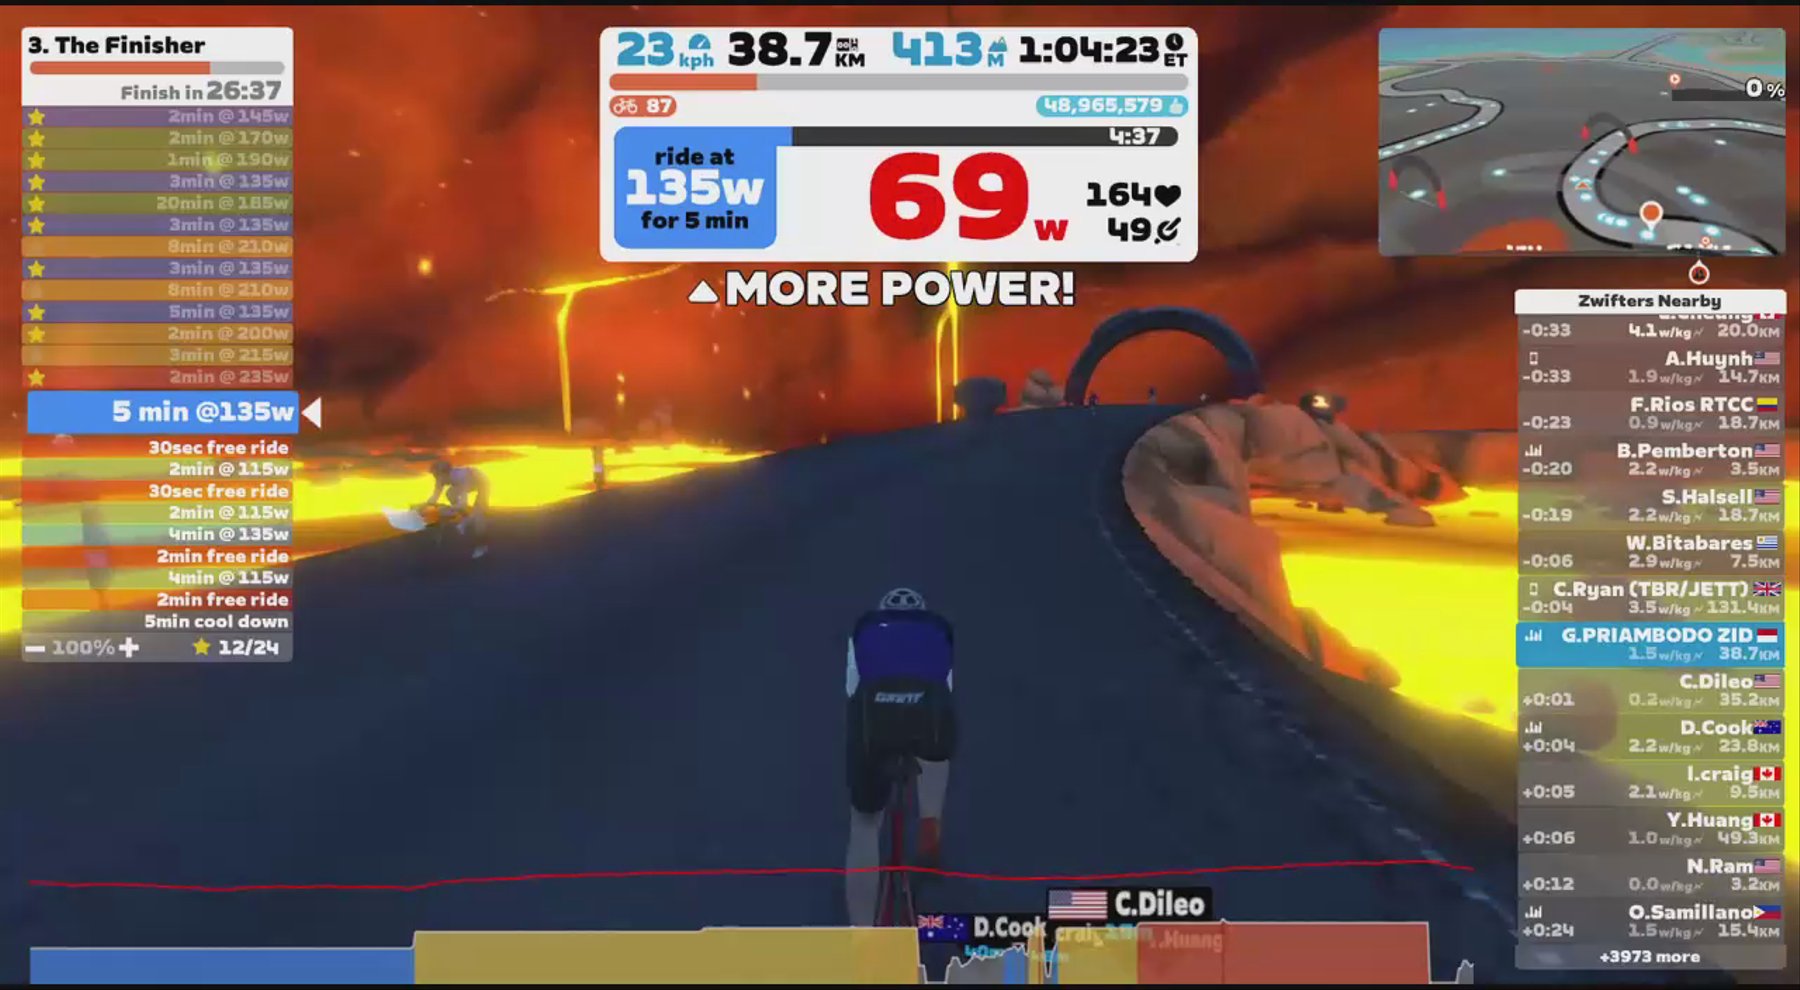 Zwift - Zwift Academy: Workout 3 | The Finisher in Watopia